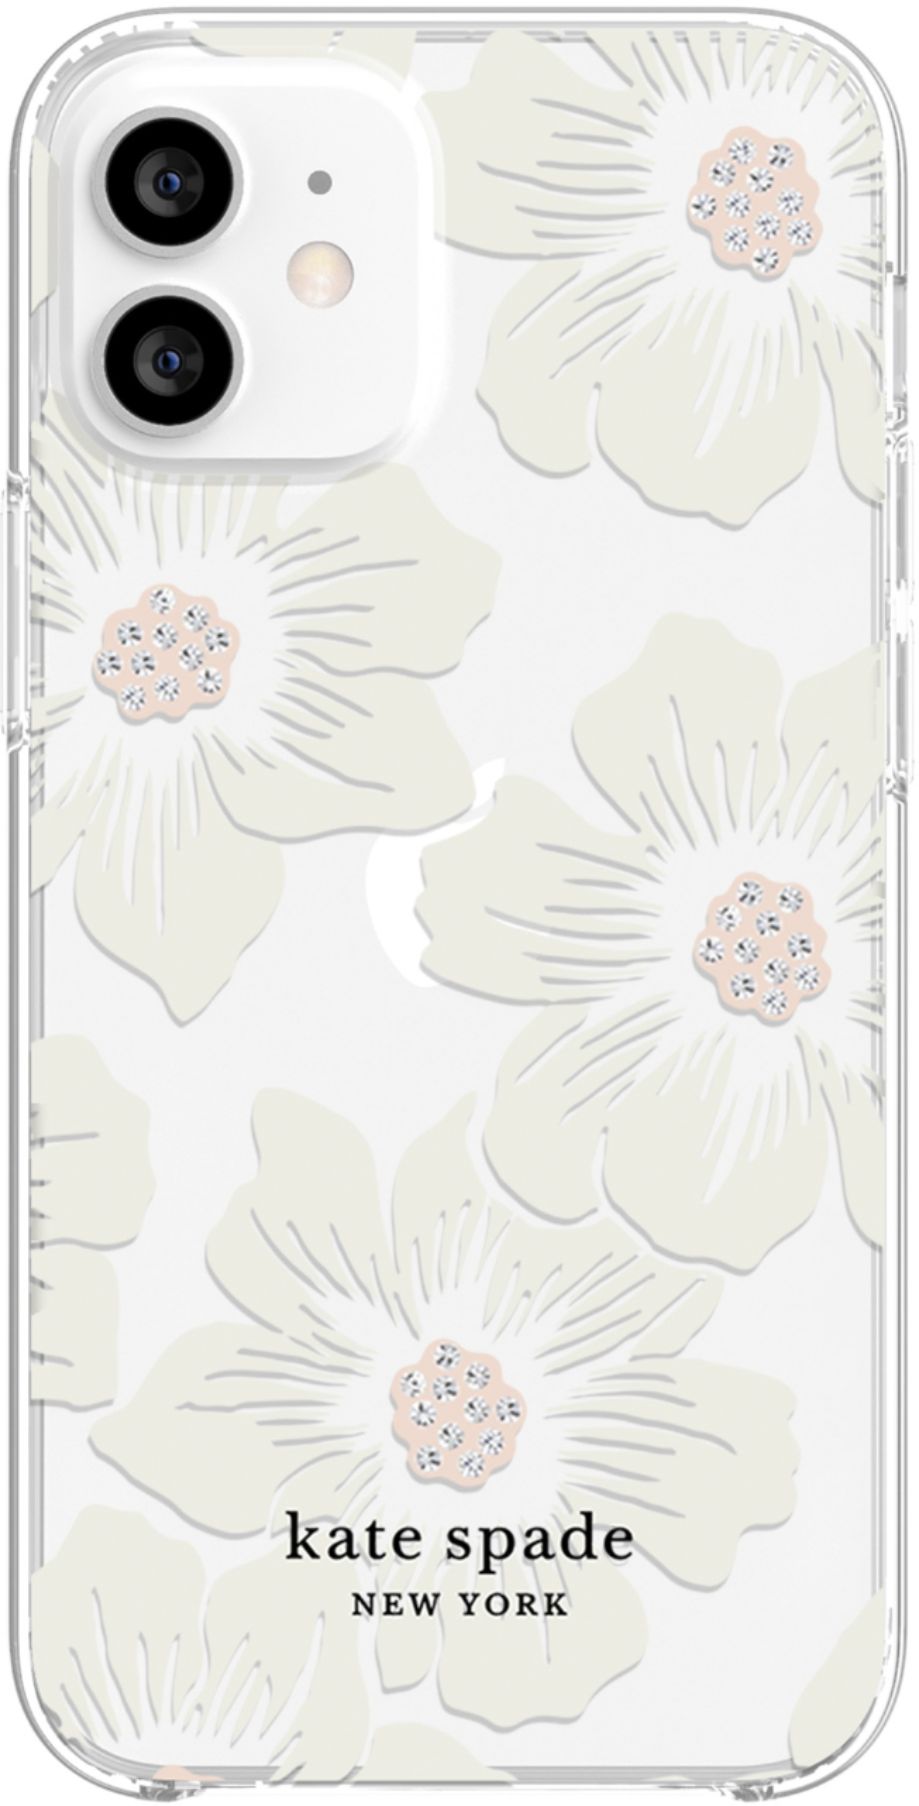 Kate Spade New York Protective Hard Shell Case For Iphone 12 Mini Clear Ksiph 151 Hhccs Best Buy